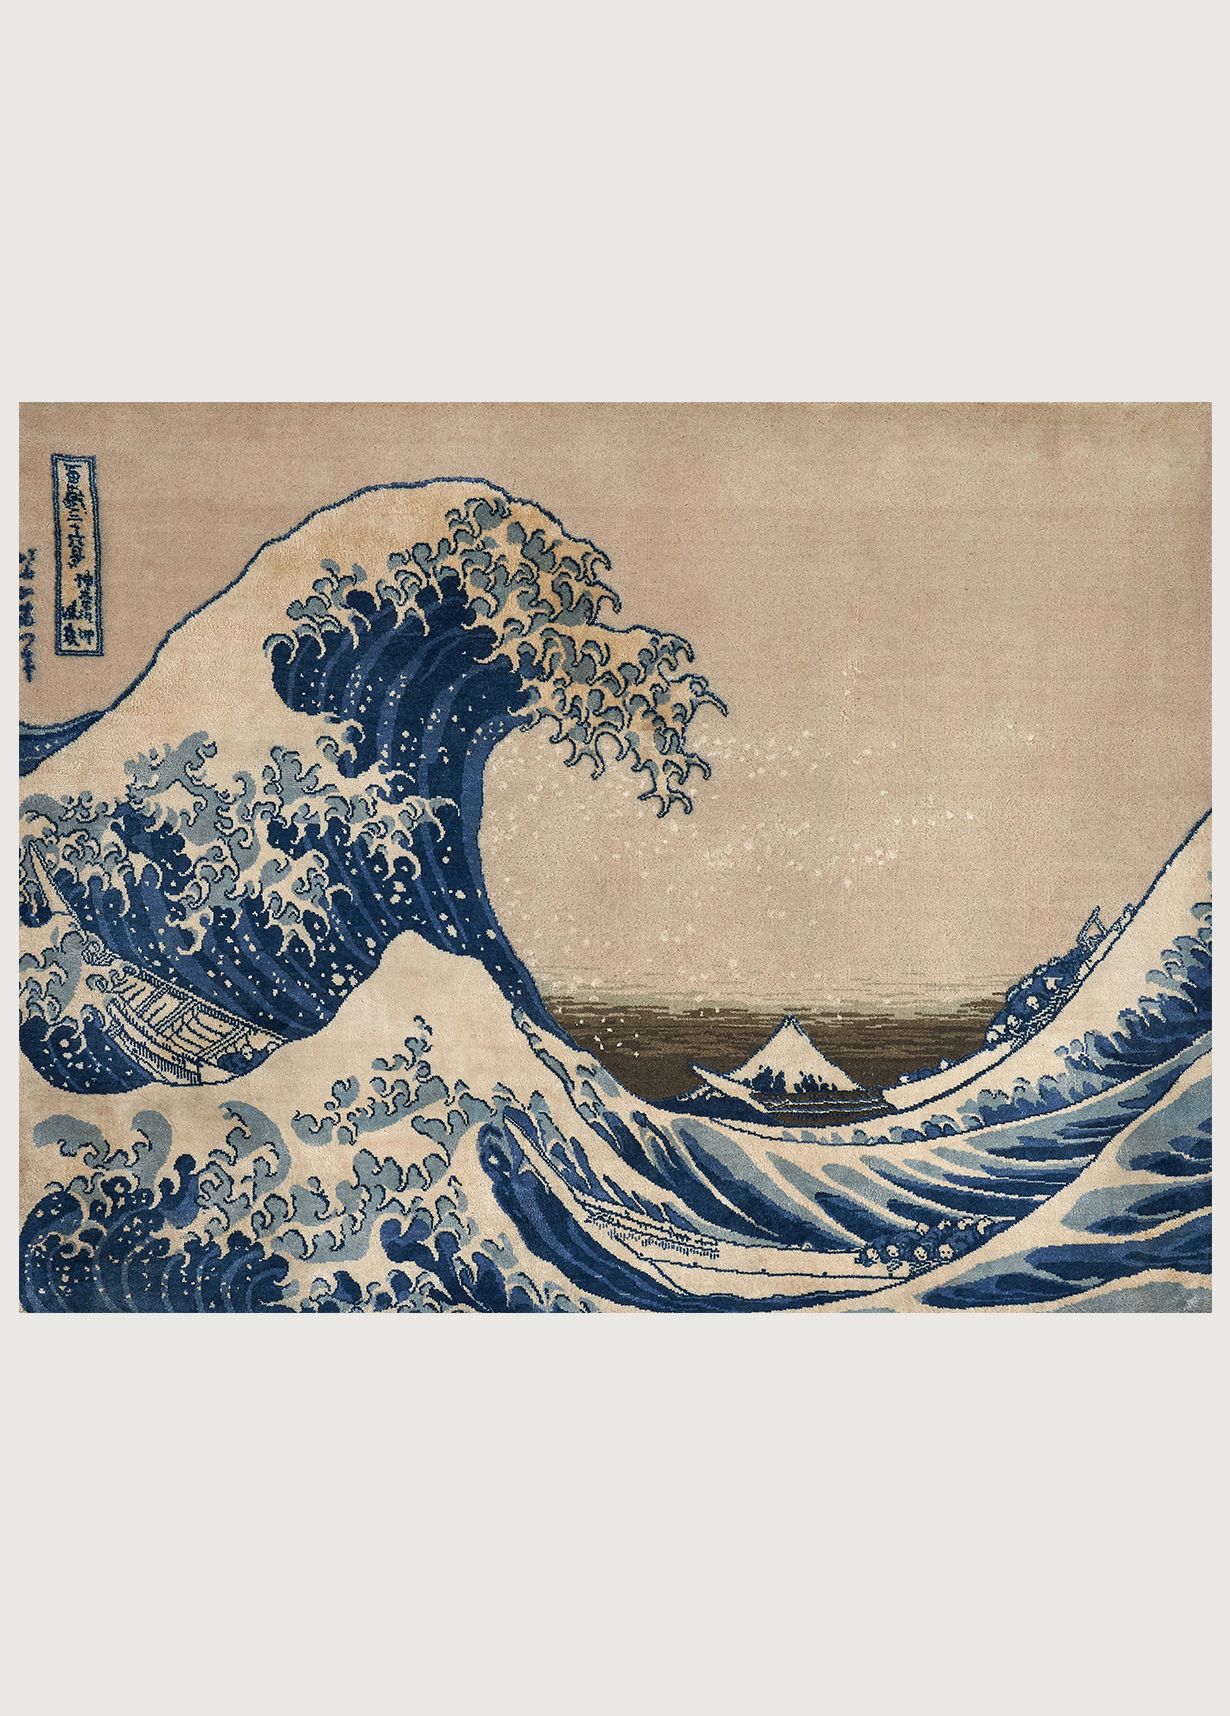 The Great Wave from the British Museum Collection